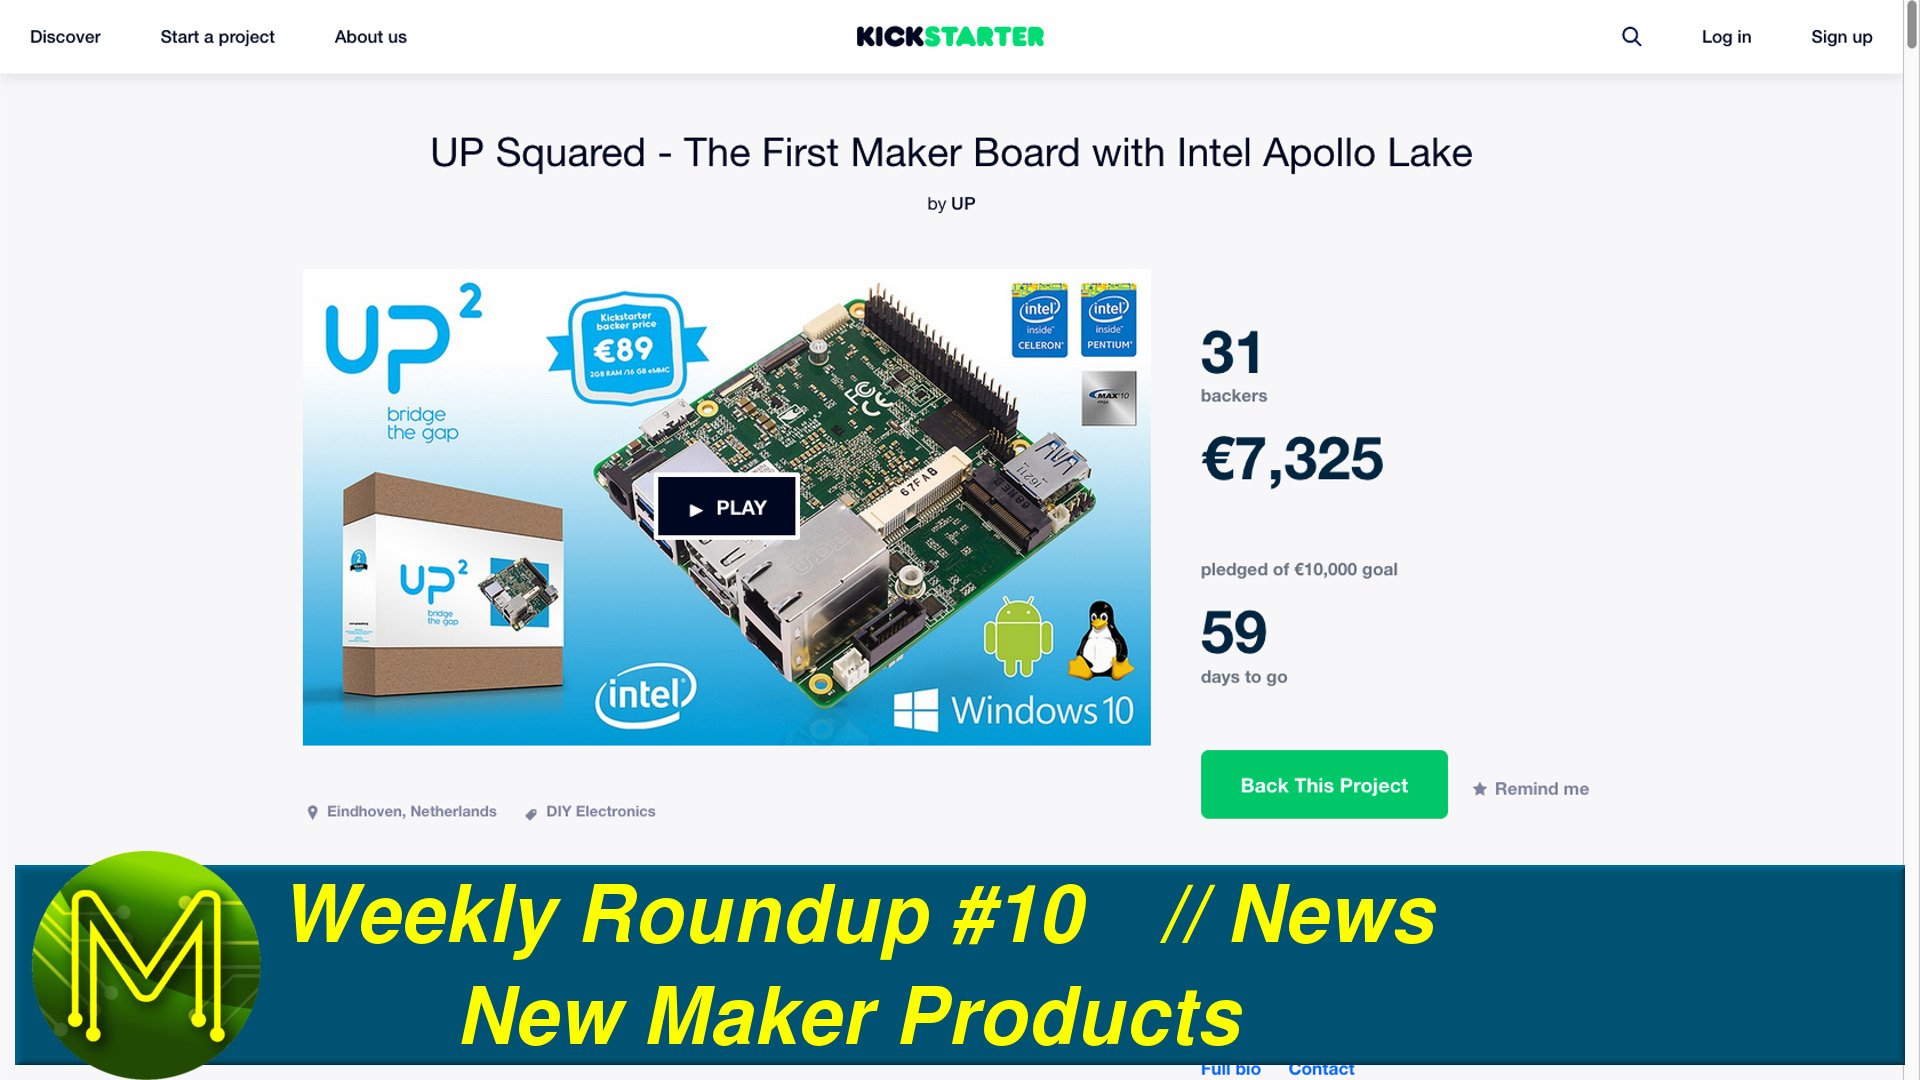 Weekly Roundup #10 - New Maker Products // News